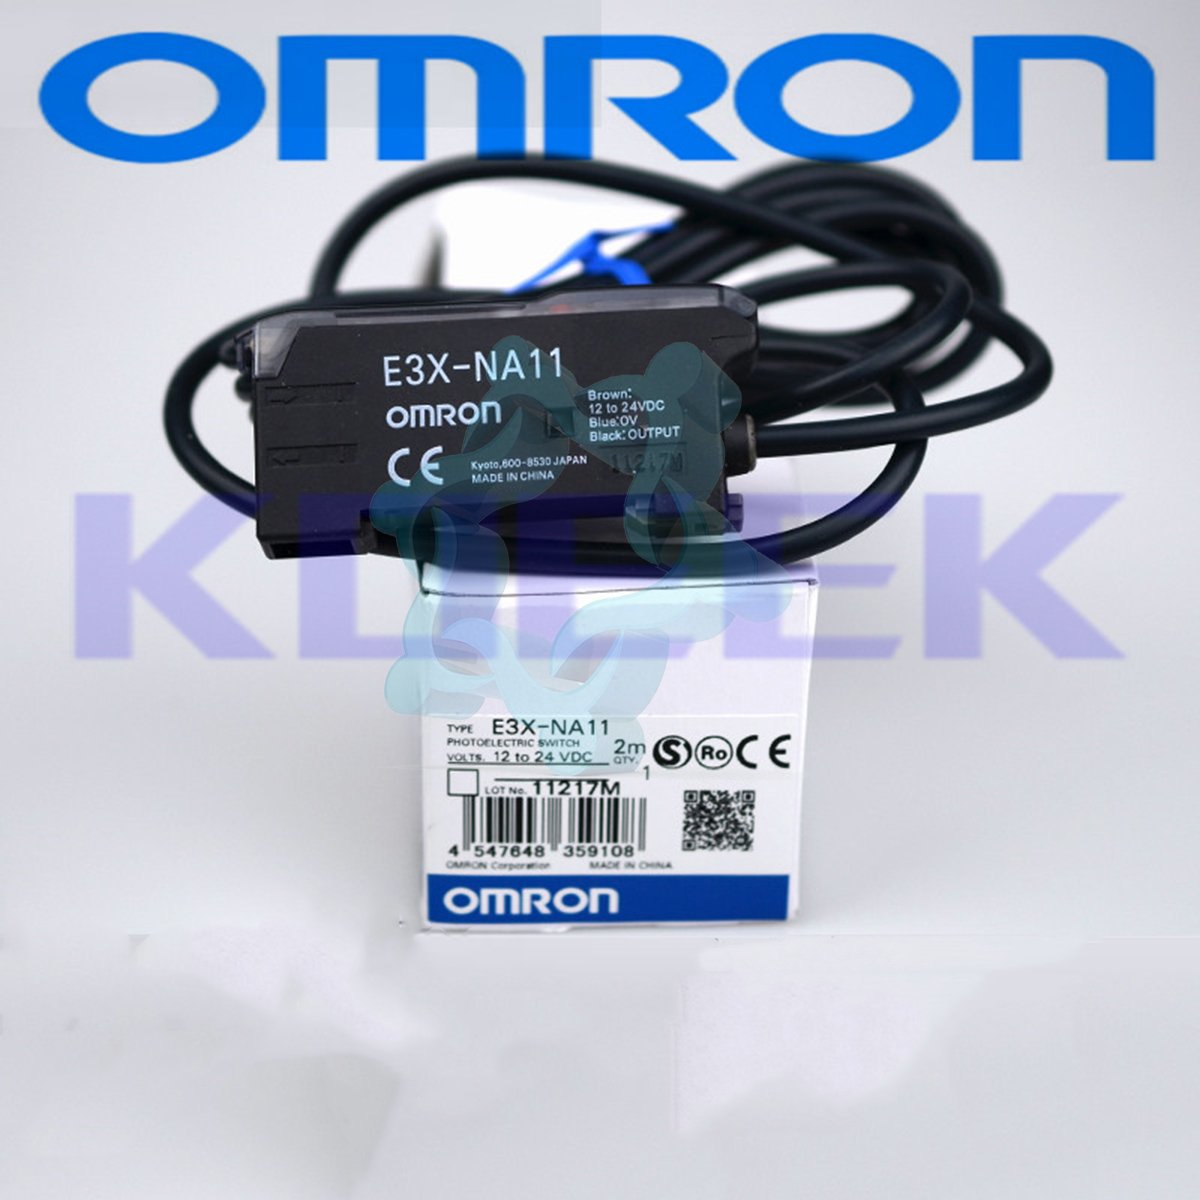 E3X-ZD11 KOEED 101-200, 80%, import_2020_10_10_031751, Omron, Other